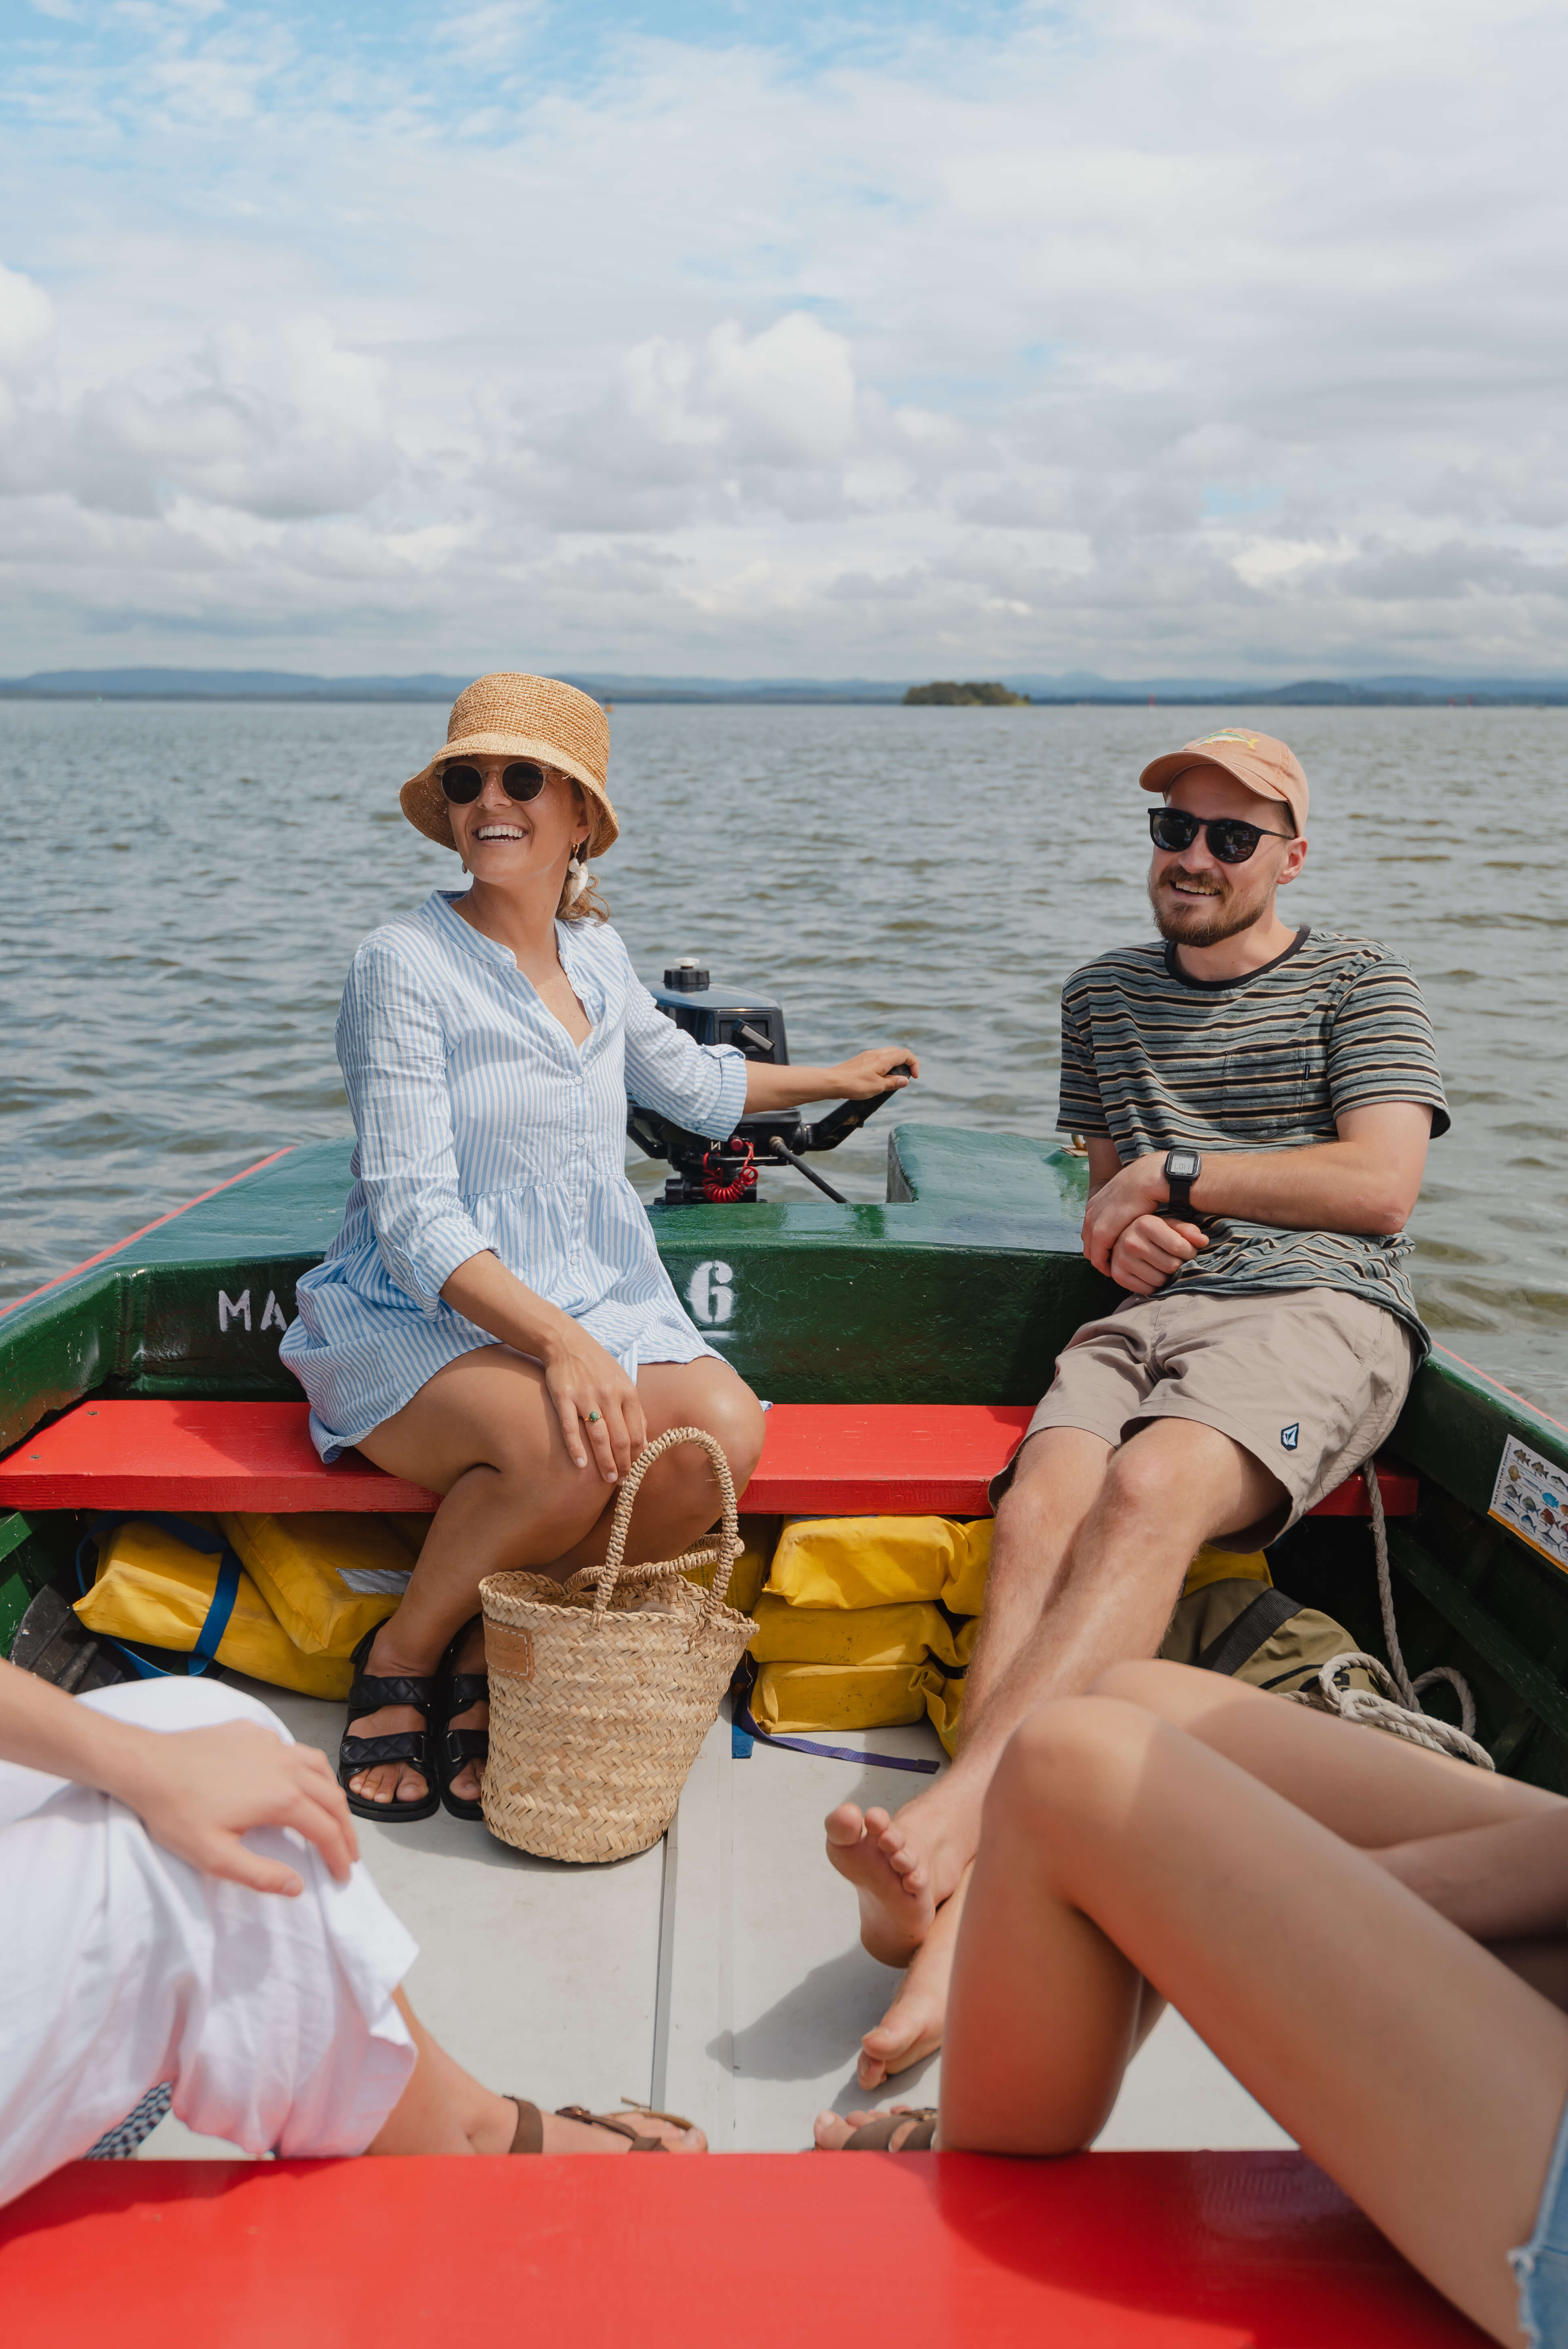 group of tourists depart on boat on lake happily